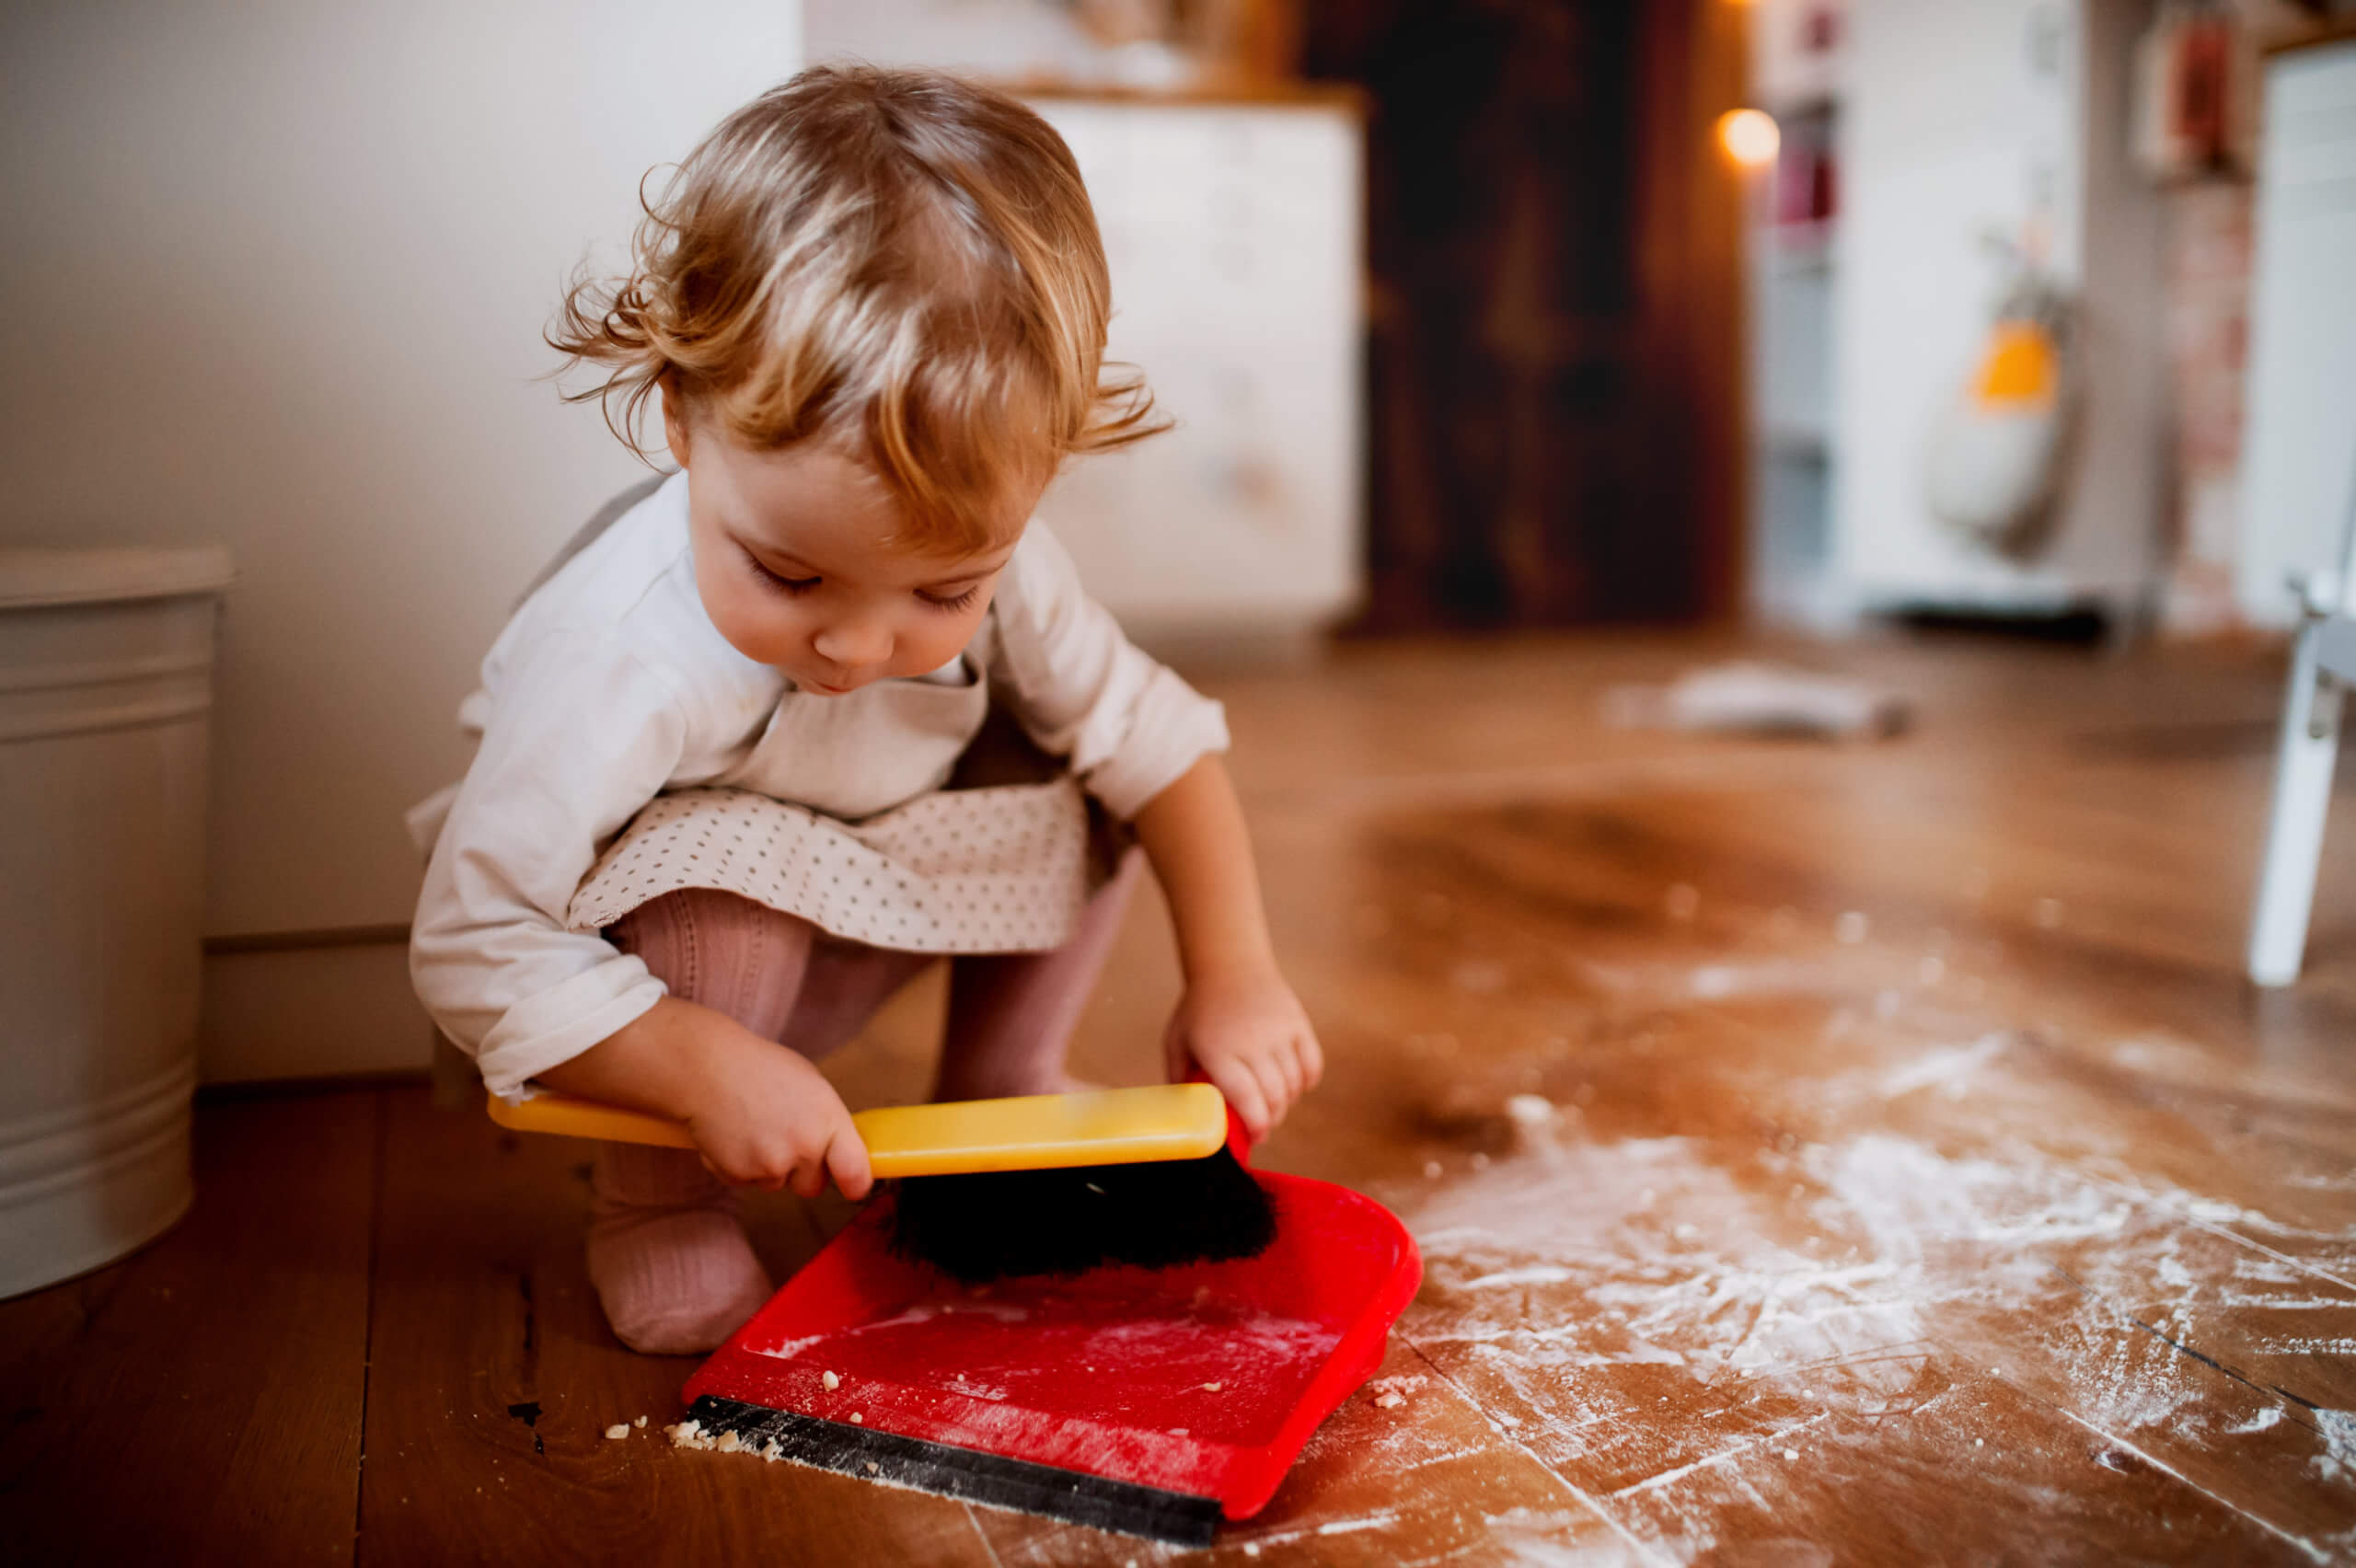 The 20 Best Kid & Baby-friendly Cleaning Products for Your Home